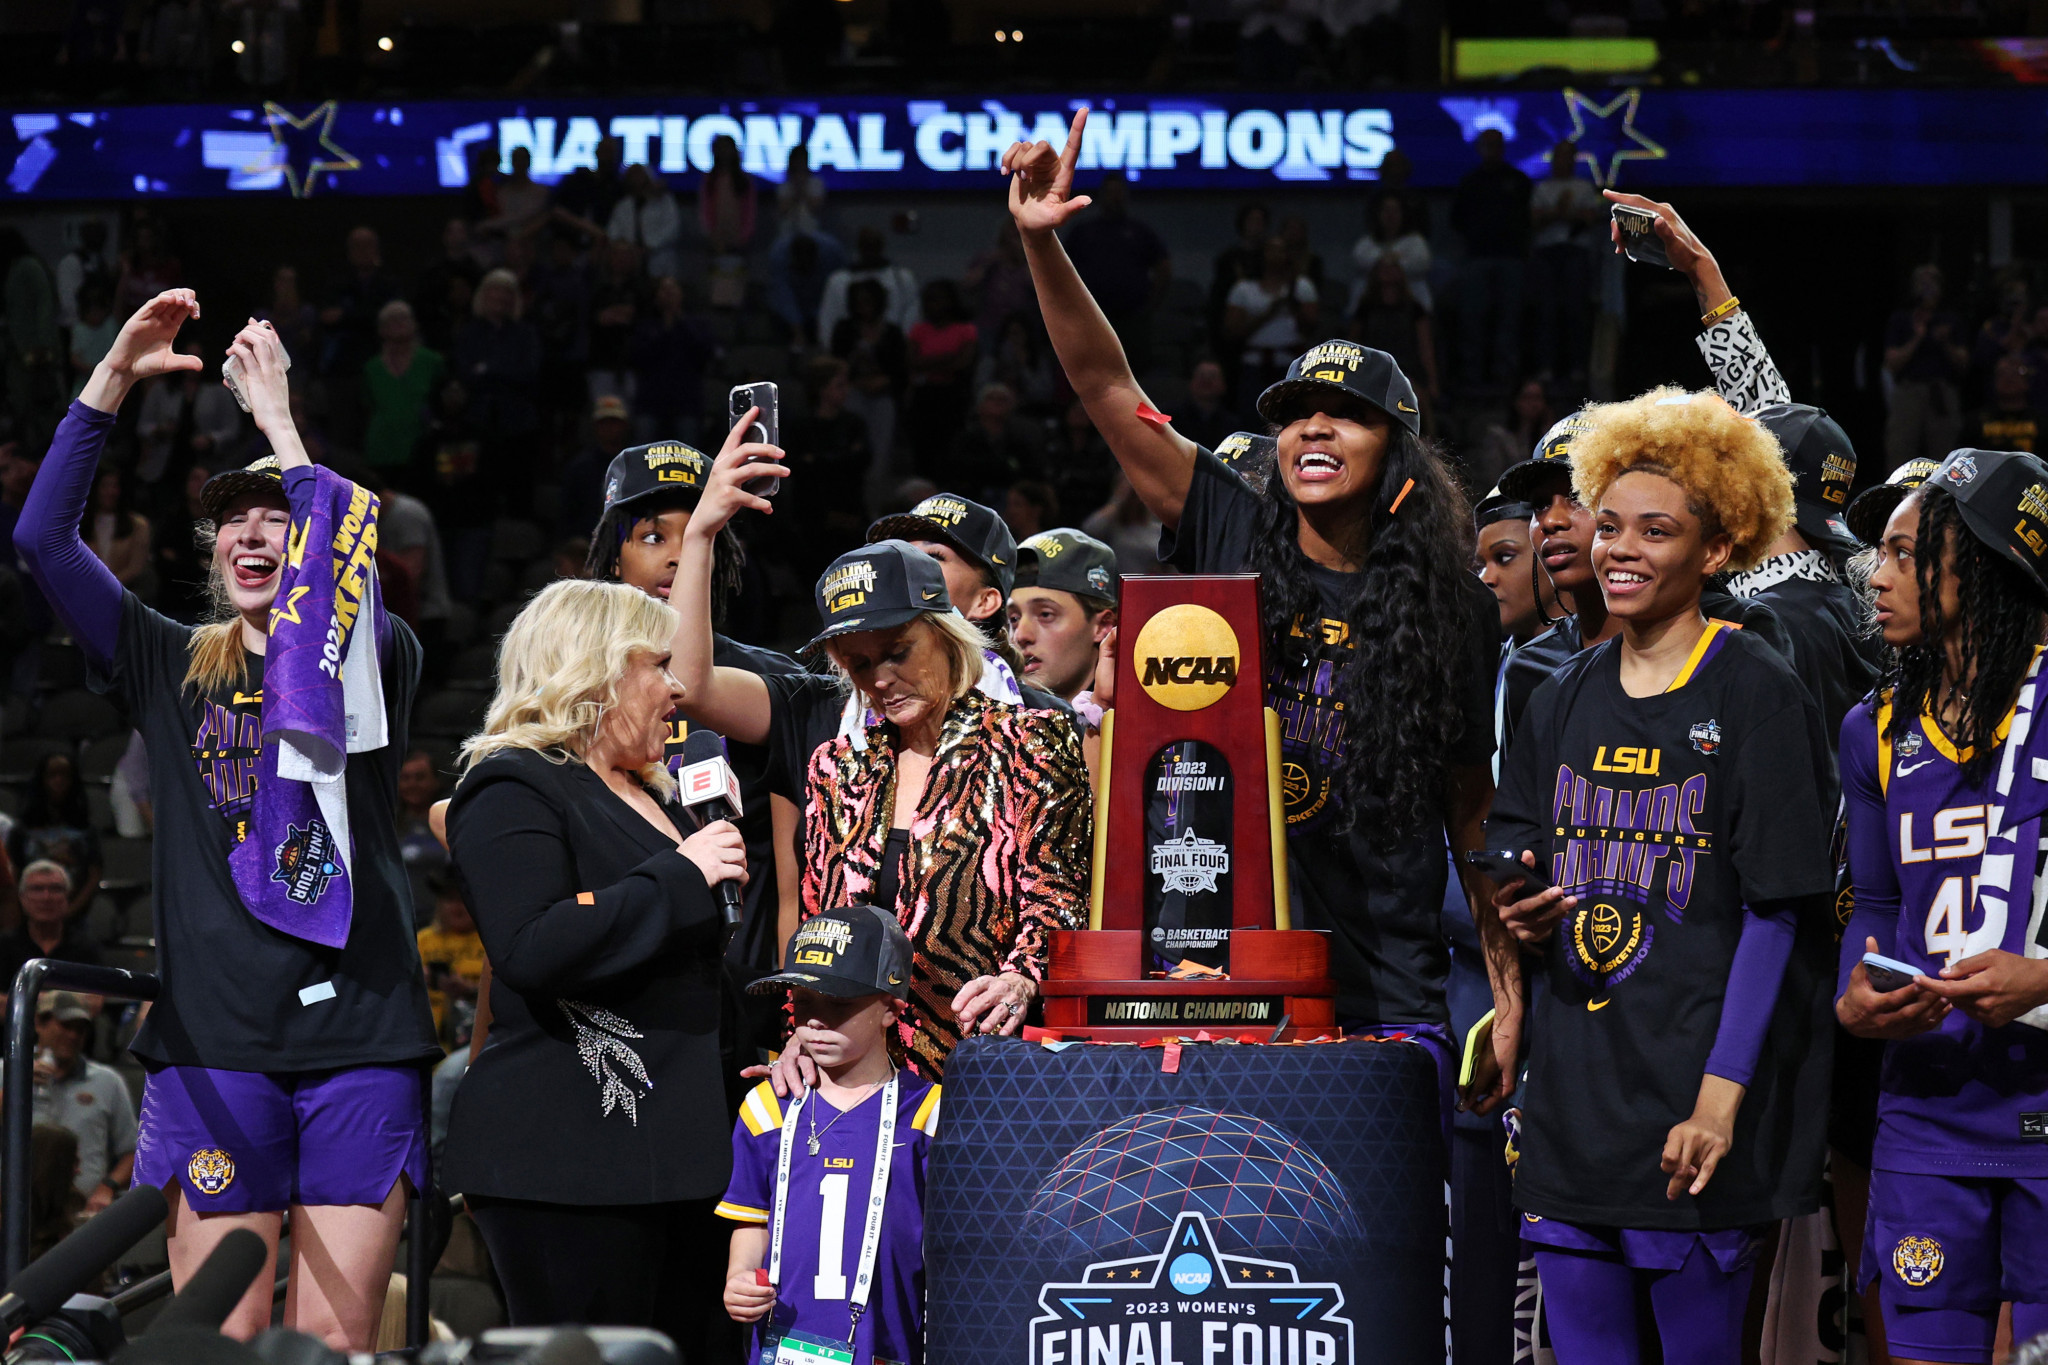 Louisiana State University, winners of the NCAA women's basketball champions, have been invited to their own White House reception later this month ©Getty Images